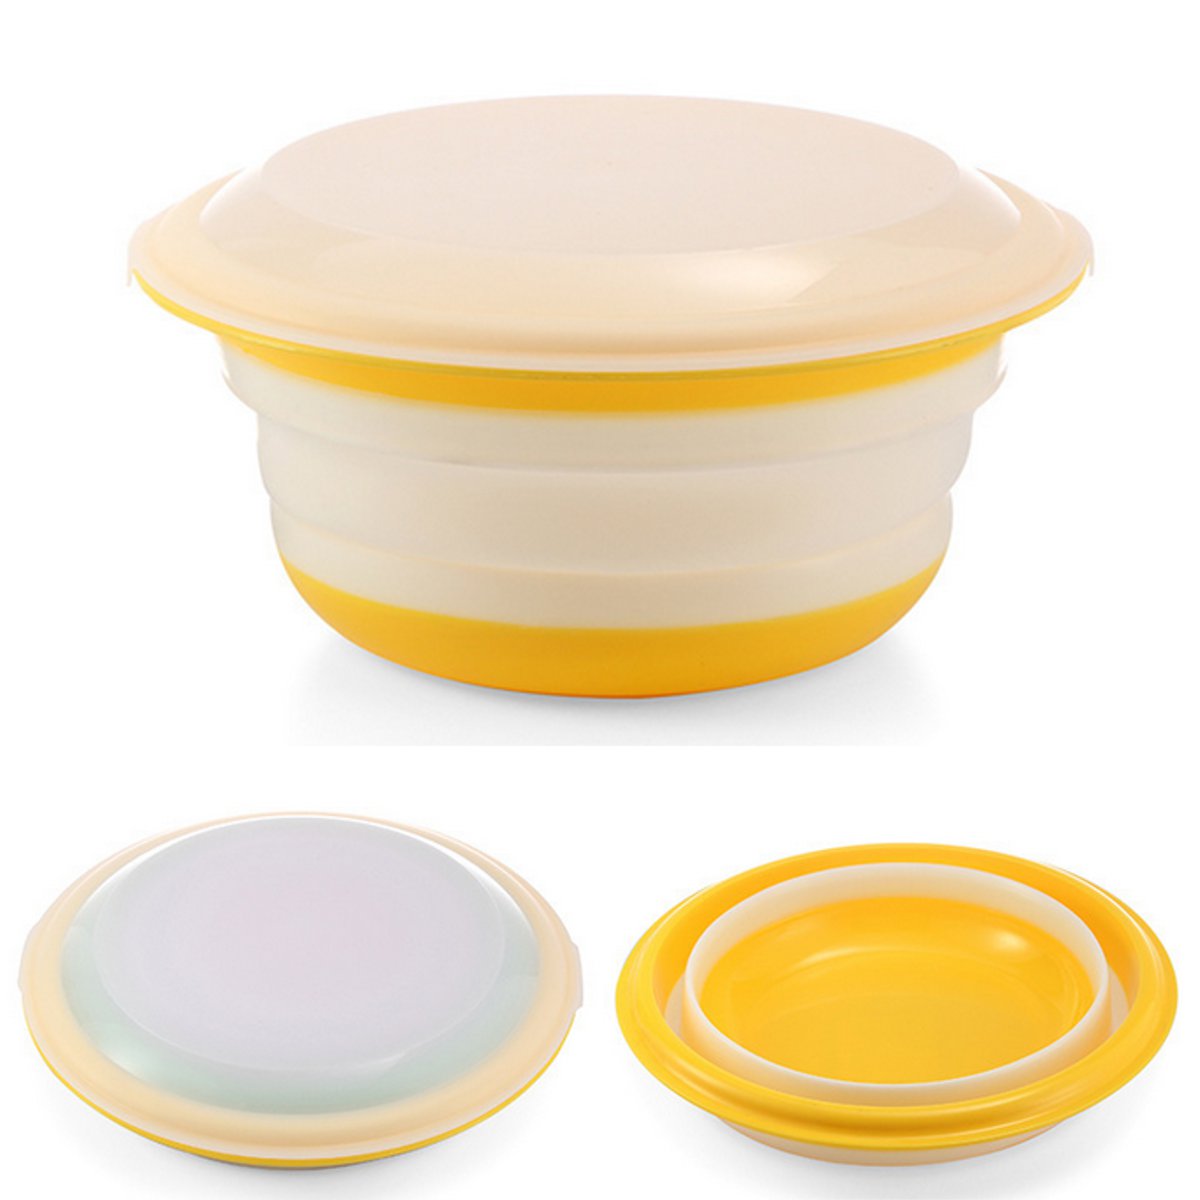 https://meal-prep-gear-shop.myshopify.com/cdn/shop/products/3Pcs-Set-Silicone-Collapsible-Storage-Bowls-Dish-Lids-Stackable-Food-Meal-Prep-Containers-Home-Office-Portable_34450a05-a0b8-400b-8a33-5093bfed6ee5.jpg?v=1513131419